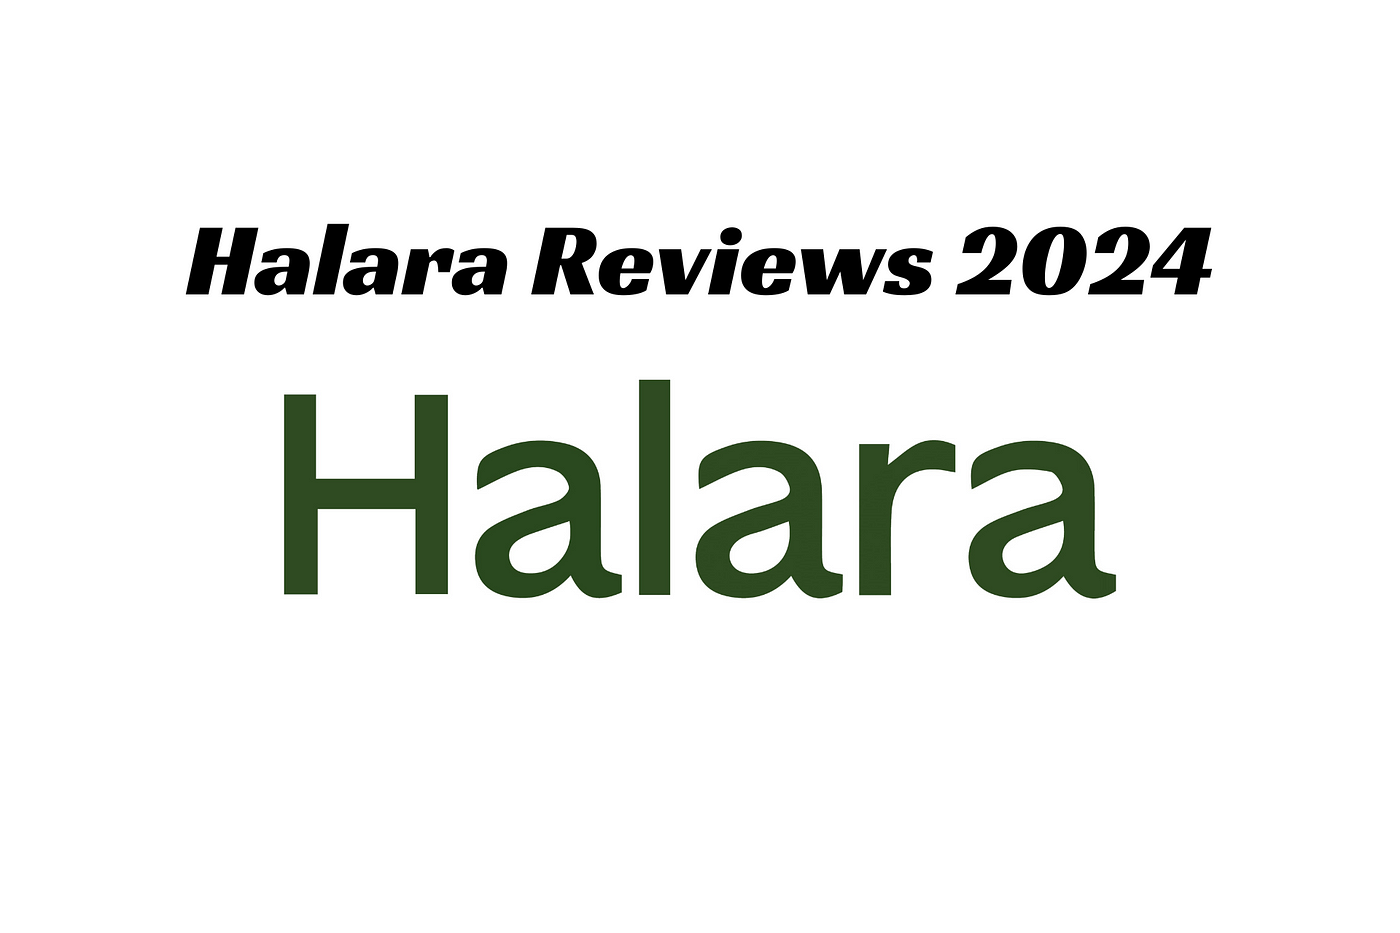 Halara Reviews 2024: A Comprehensive Analysis of Women's Clothing, by  Honest reviews of programs and products, Feb, 2024